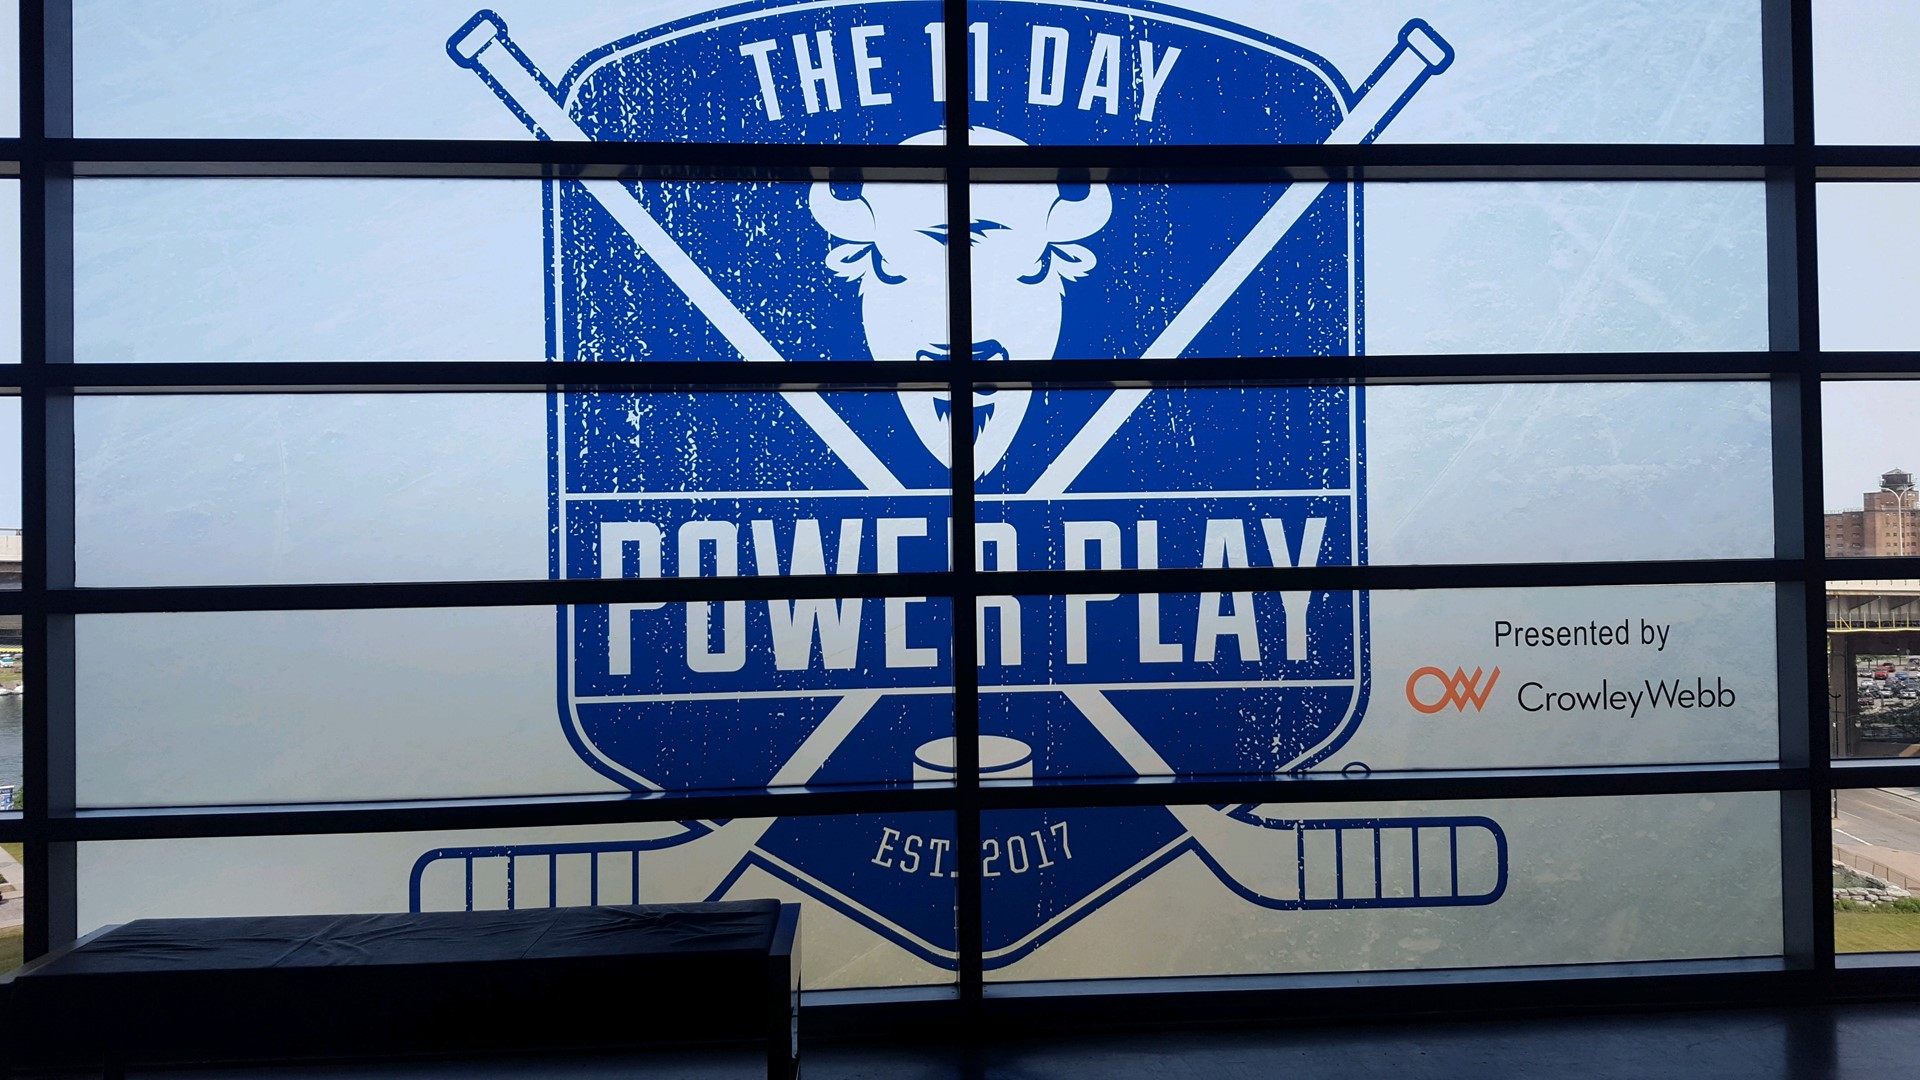 The 11 Day Power Play begins Sunday at 6 a.m. as 40 players will start a hockey game that will not stop until the night before Thanksgiving.